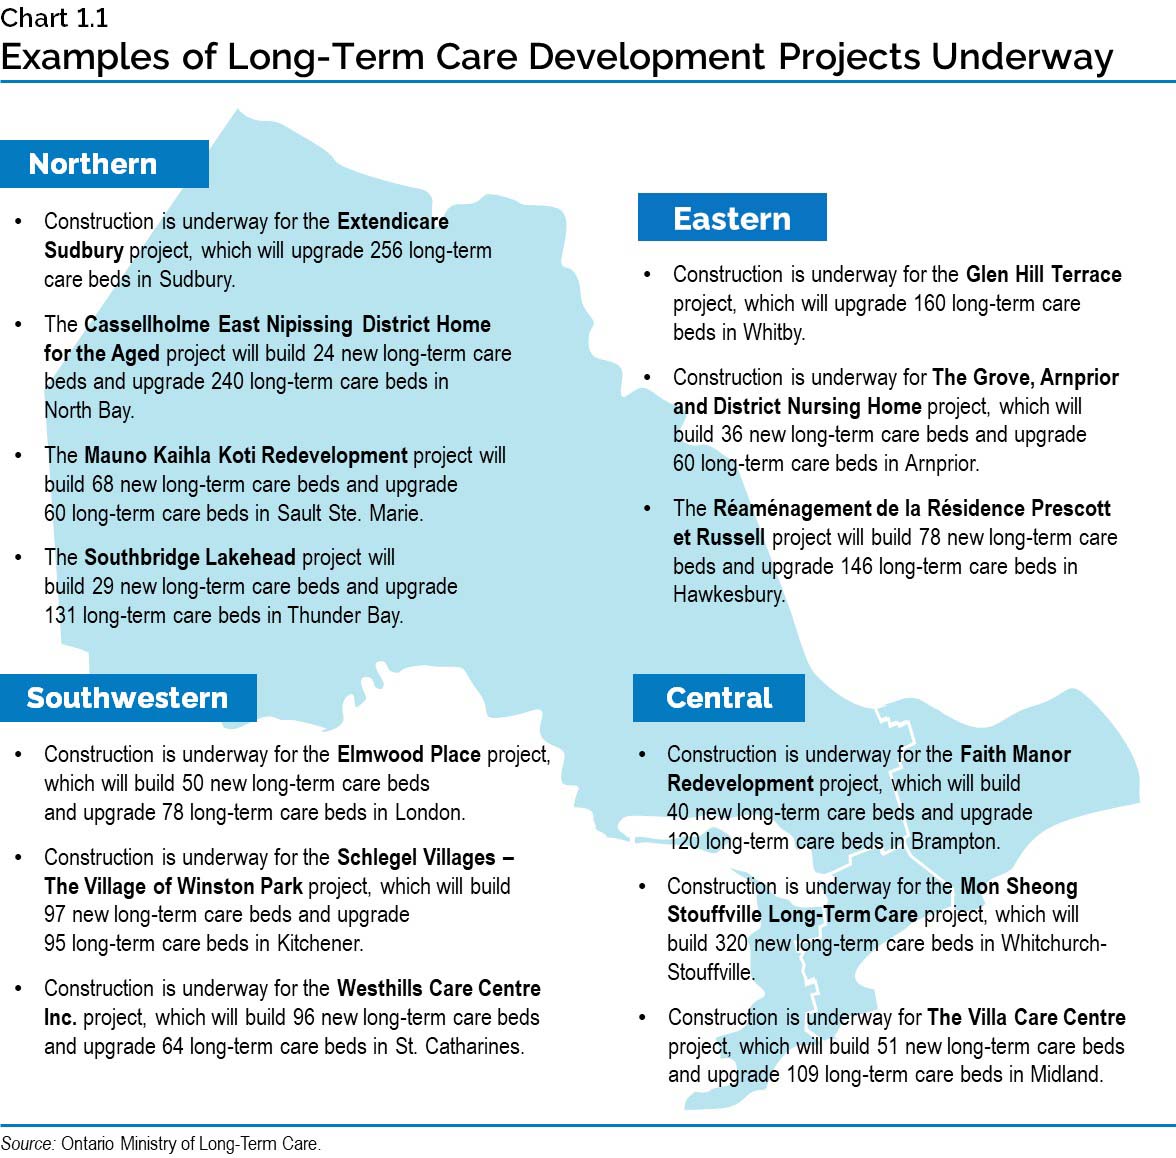 Chart 1.1: Examples of Long-Term Care Development Projects Underway